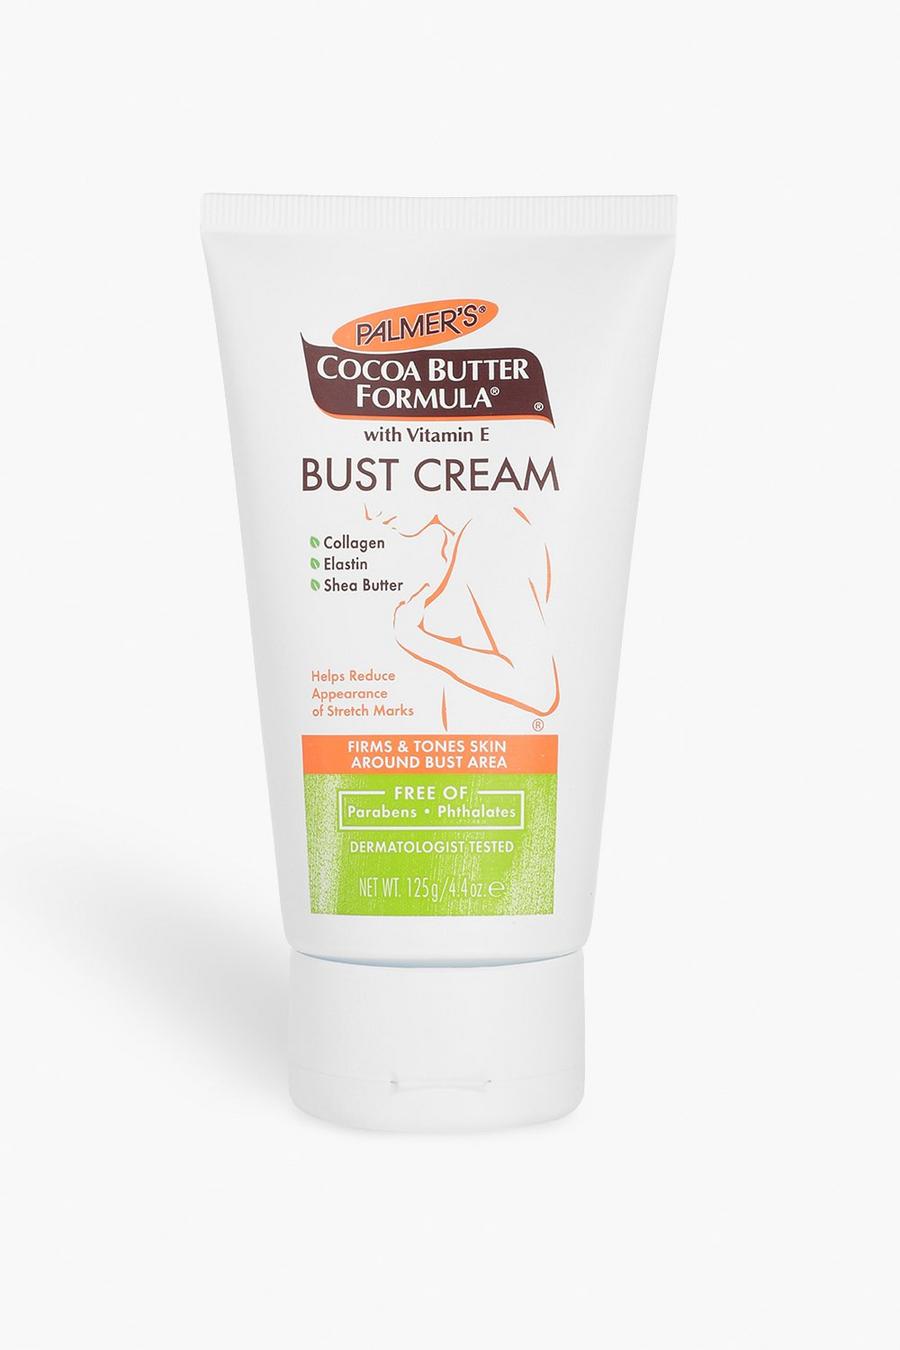 Palmers Cocoa Butter Brustcreme 125 g image number 1